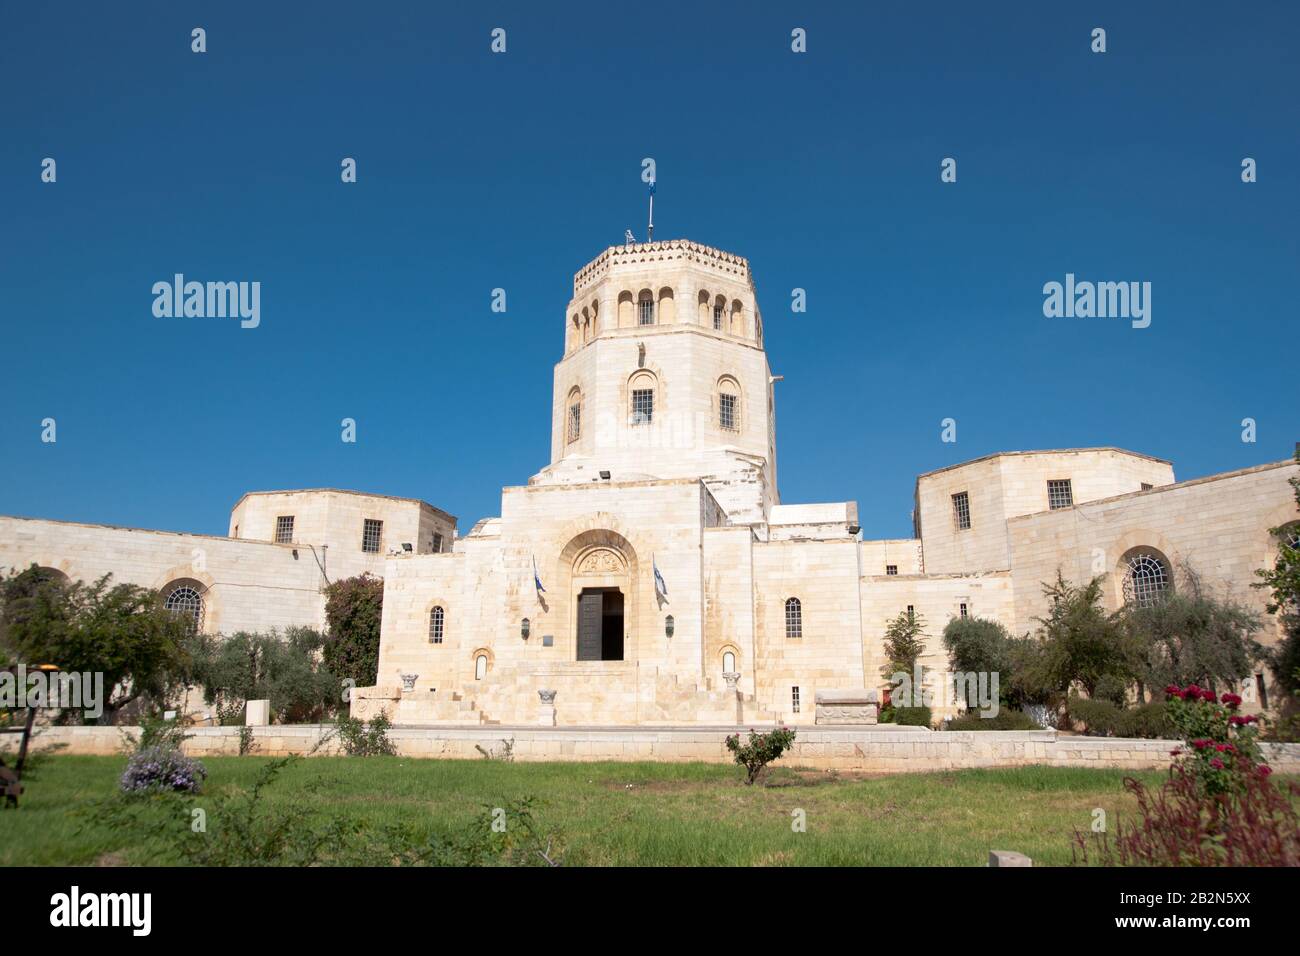 Best britanian colonial architecture in Palestine Stock Photo